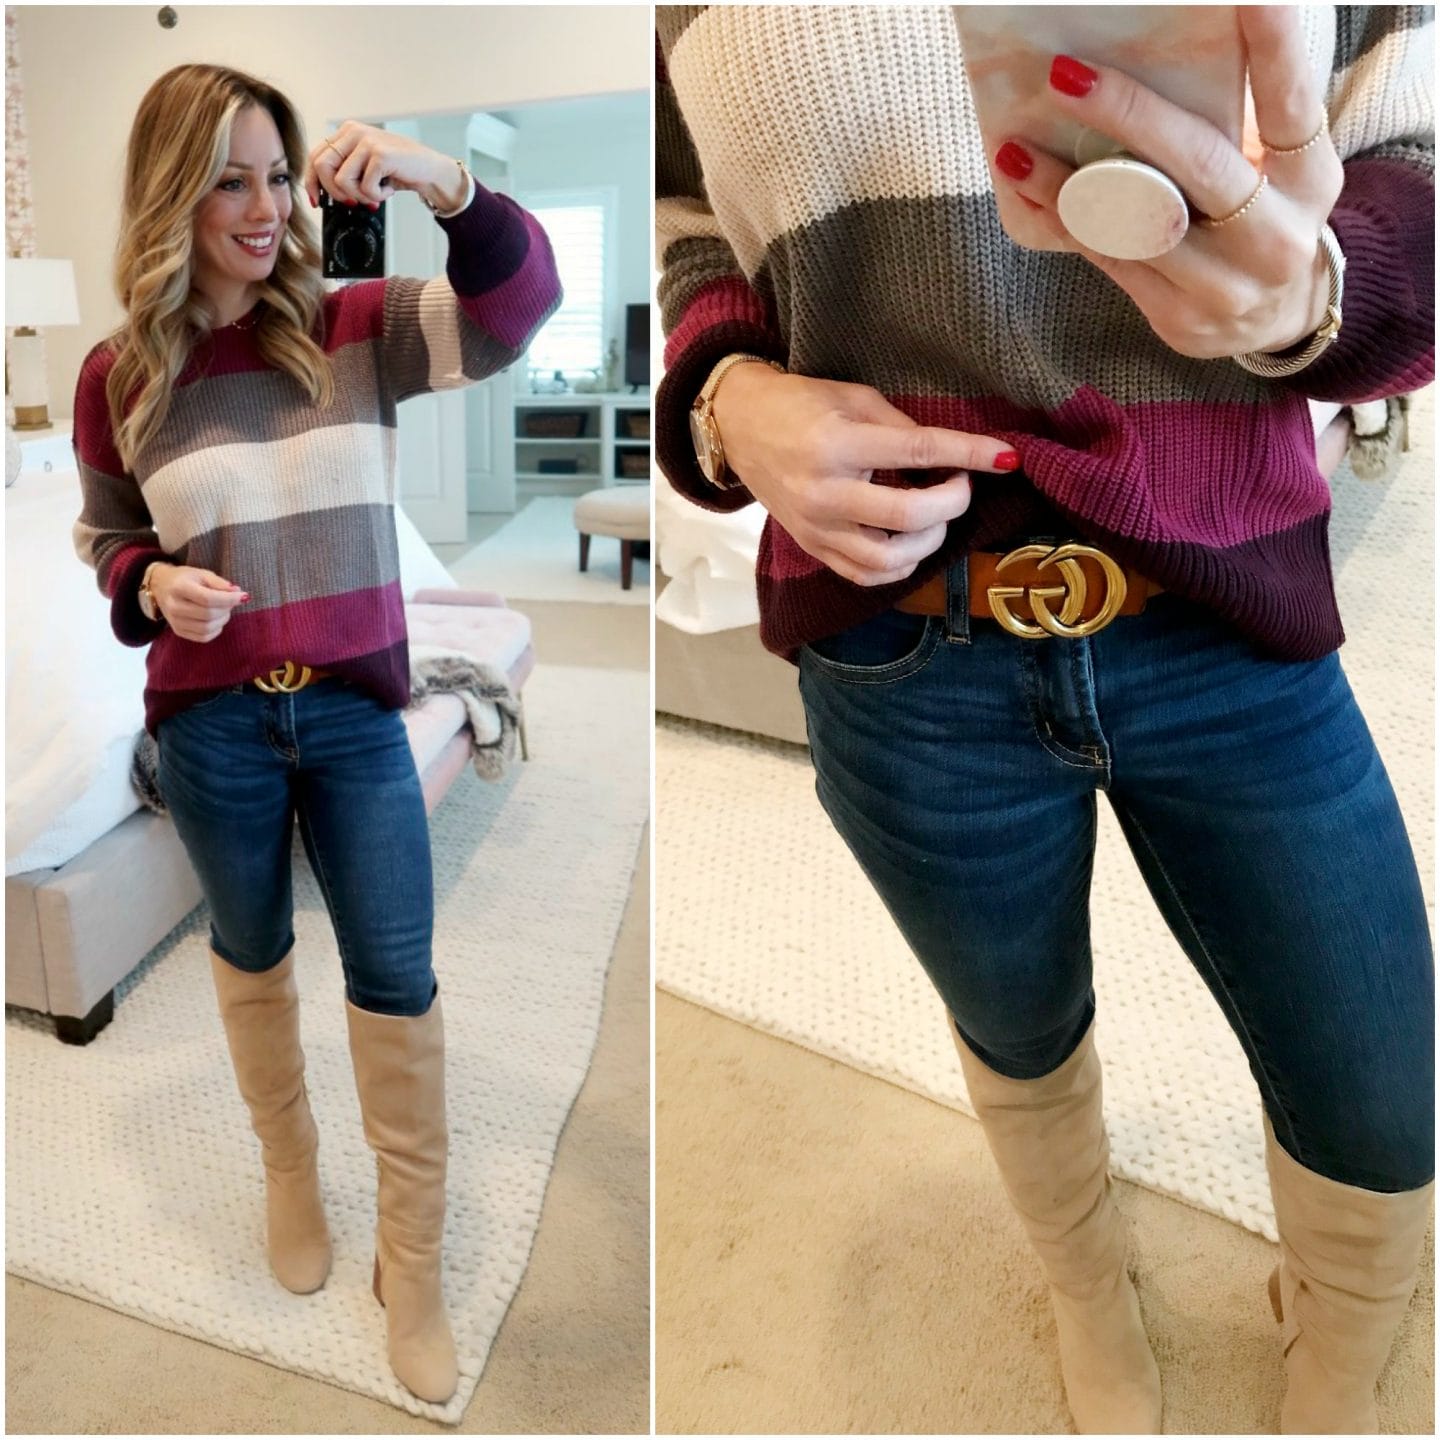 Amazon Fashion Haul CG Belt with sweater and boots